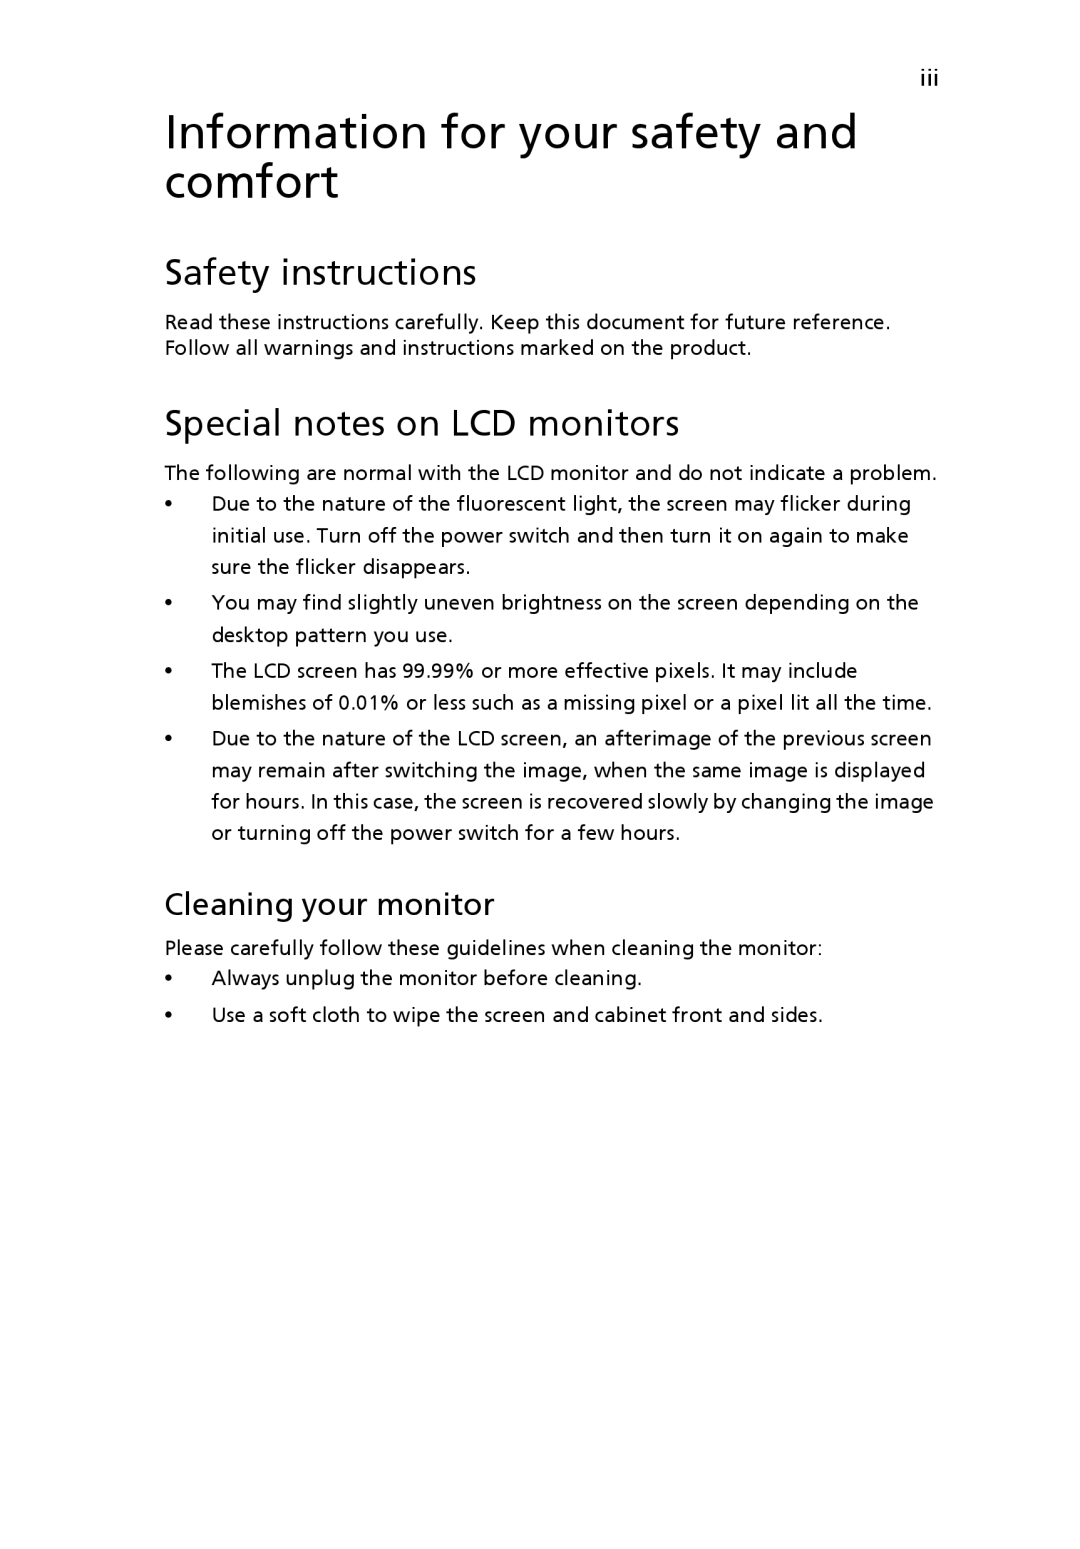 Acer S243HL manual Information for your safety and comfort, Safety instructions, Special notes on LCD monitors 